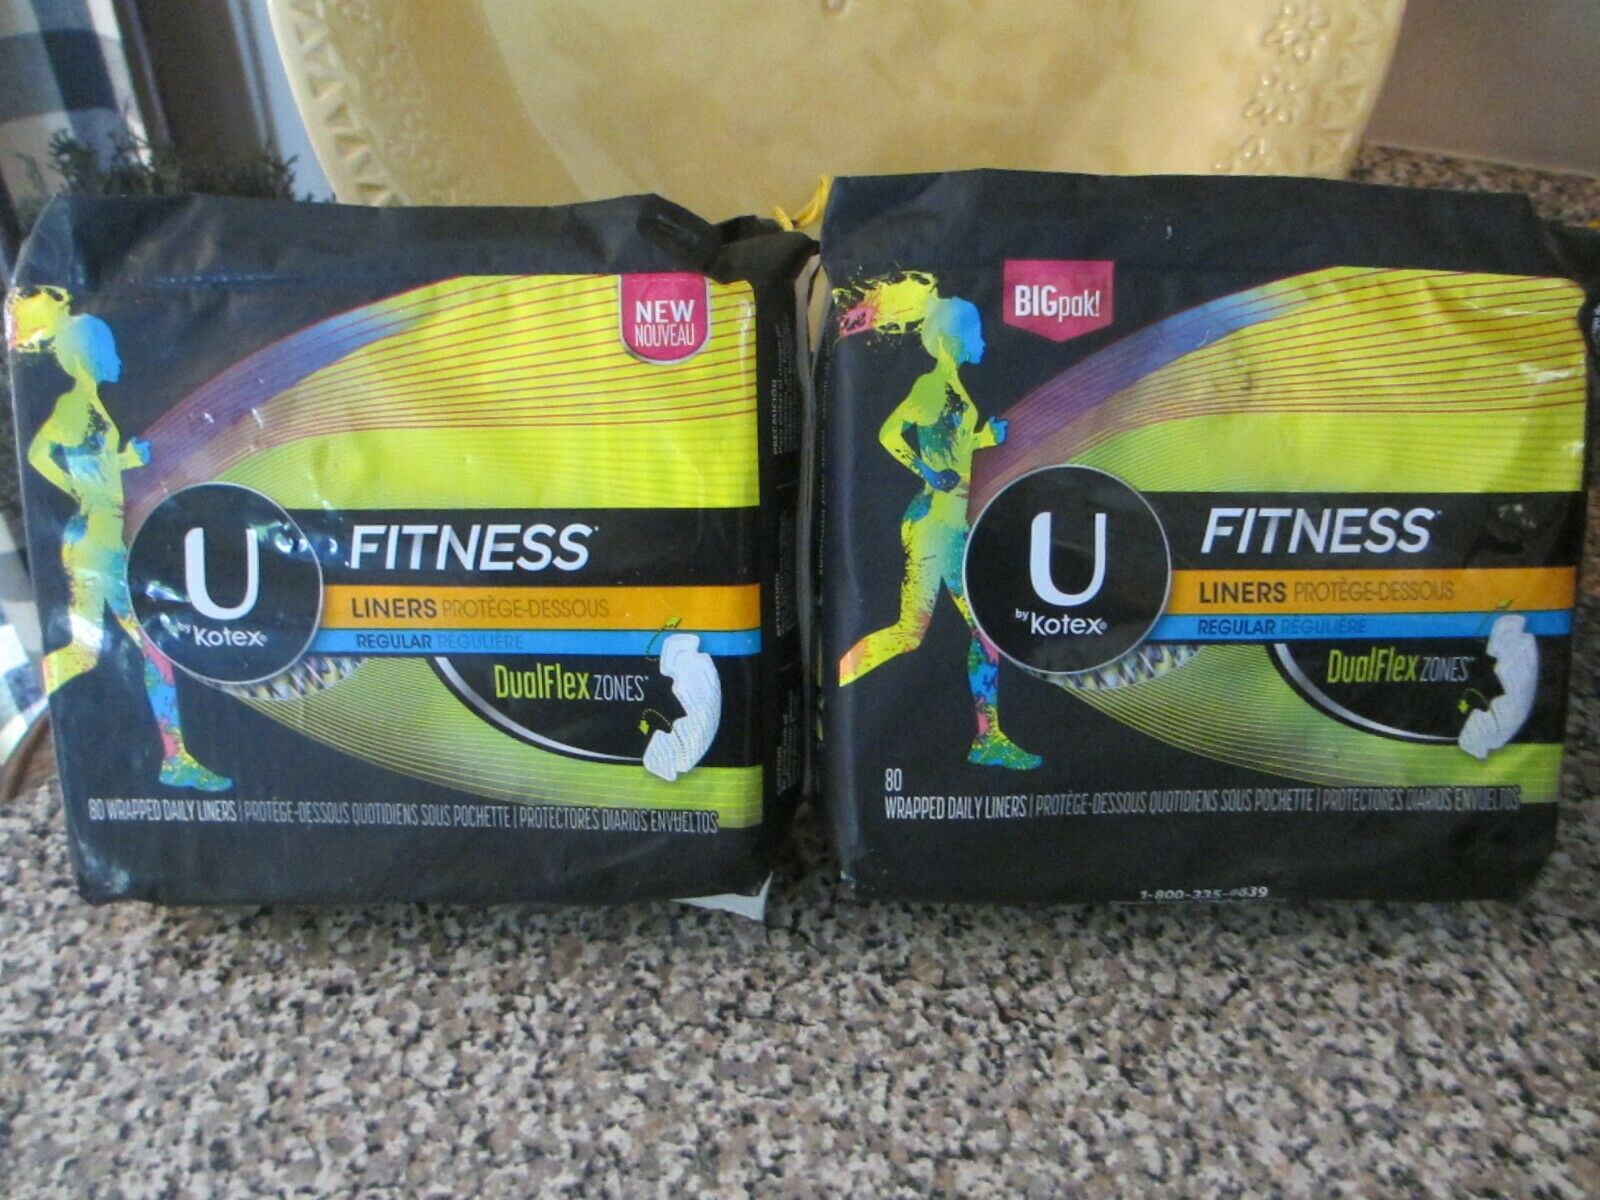 Lot Of 2 U By Kotex Fitness Liners 80 Wrapped Daily Liners Regular **big Pack!**